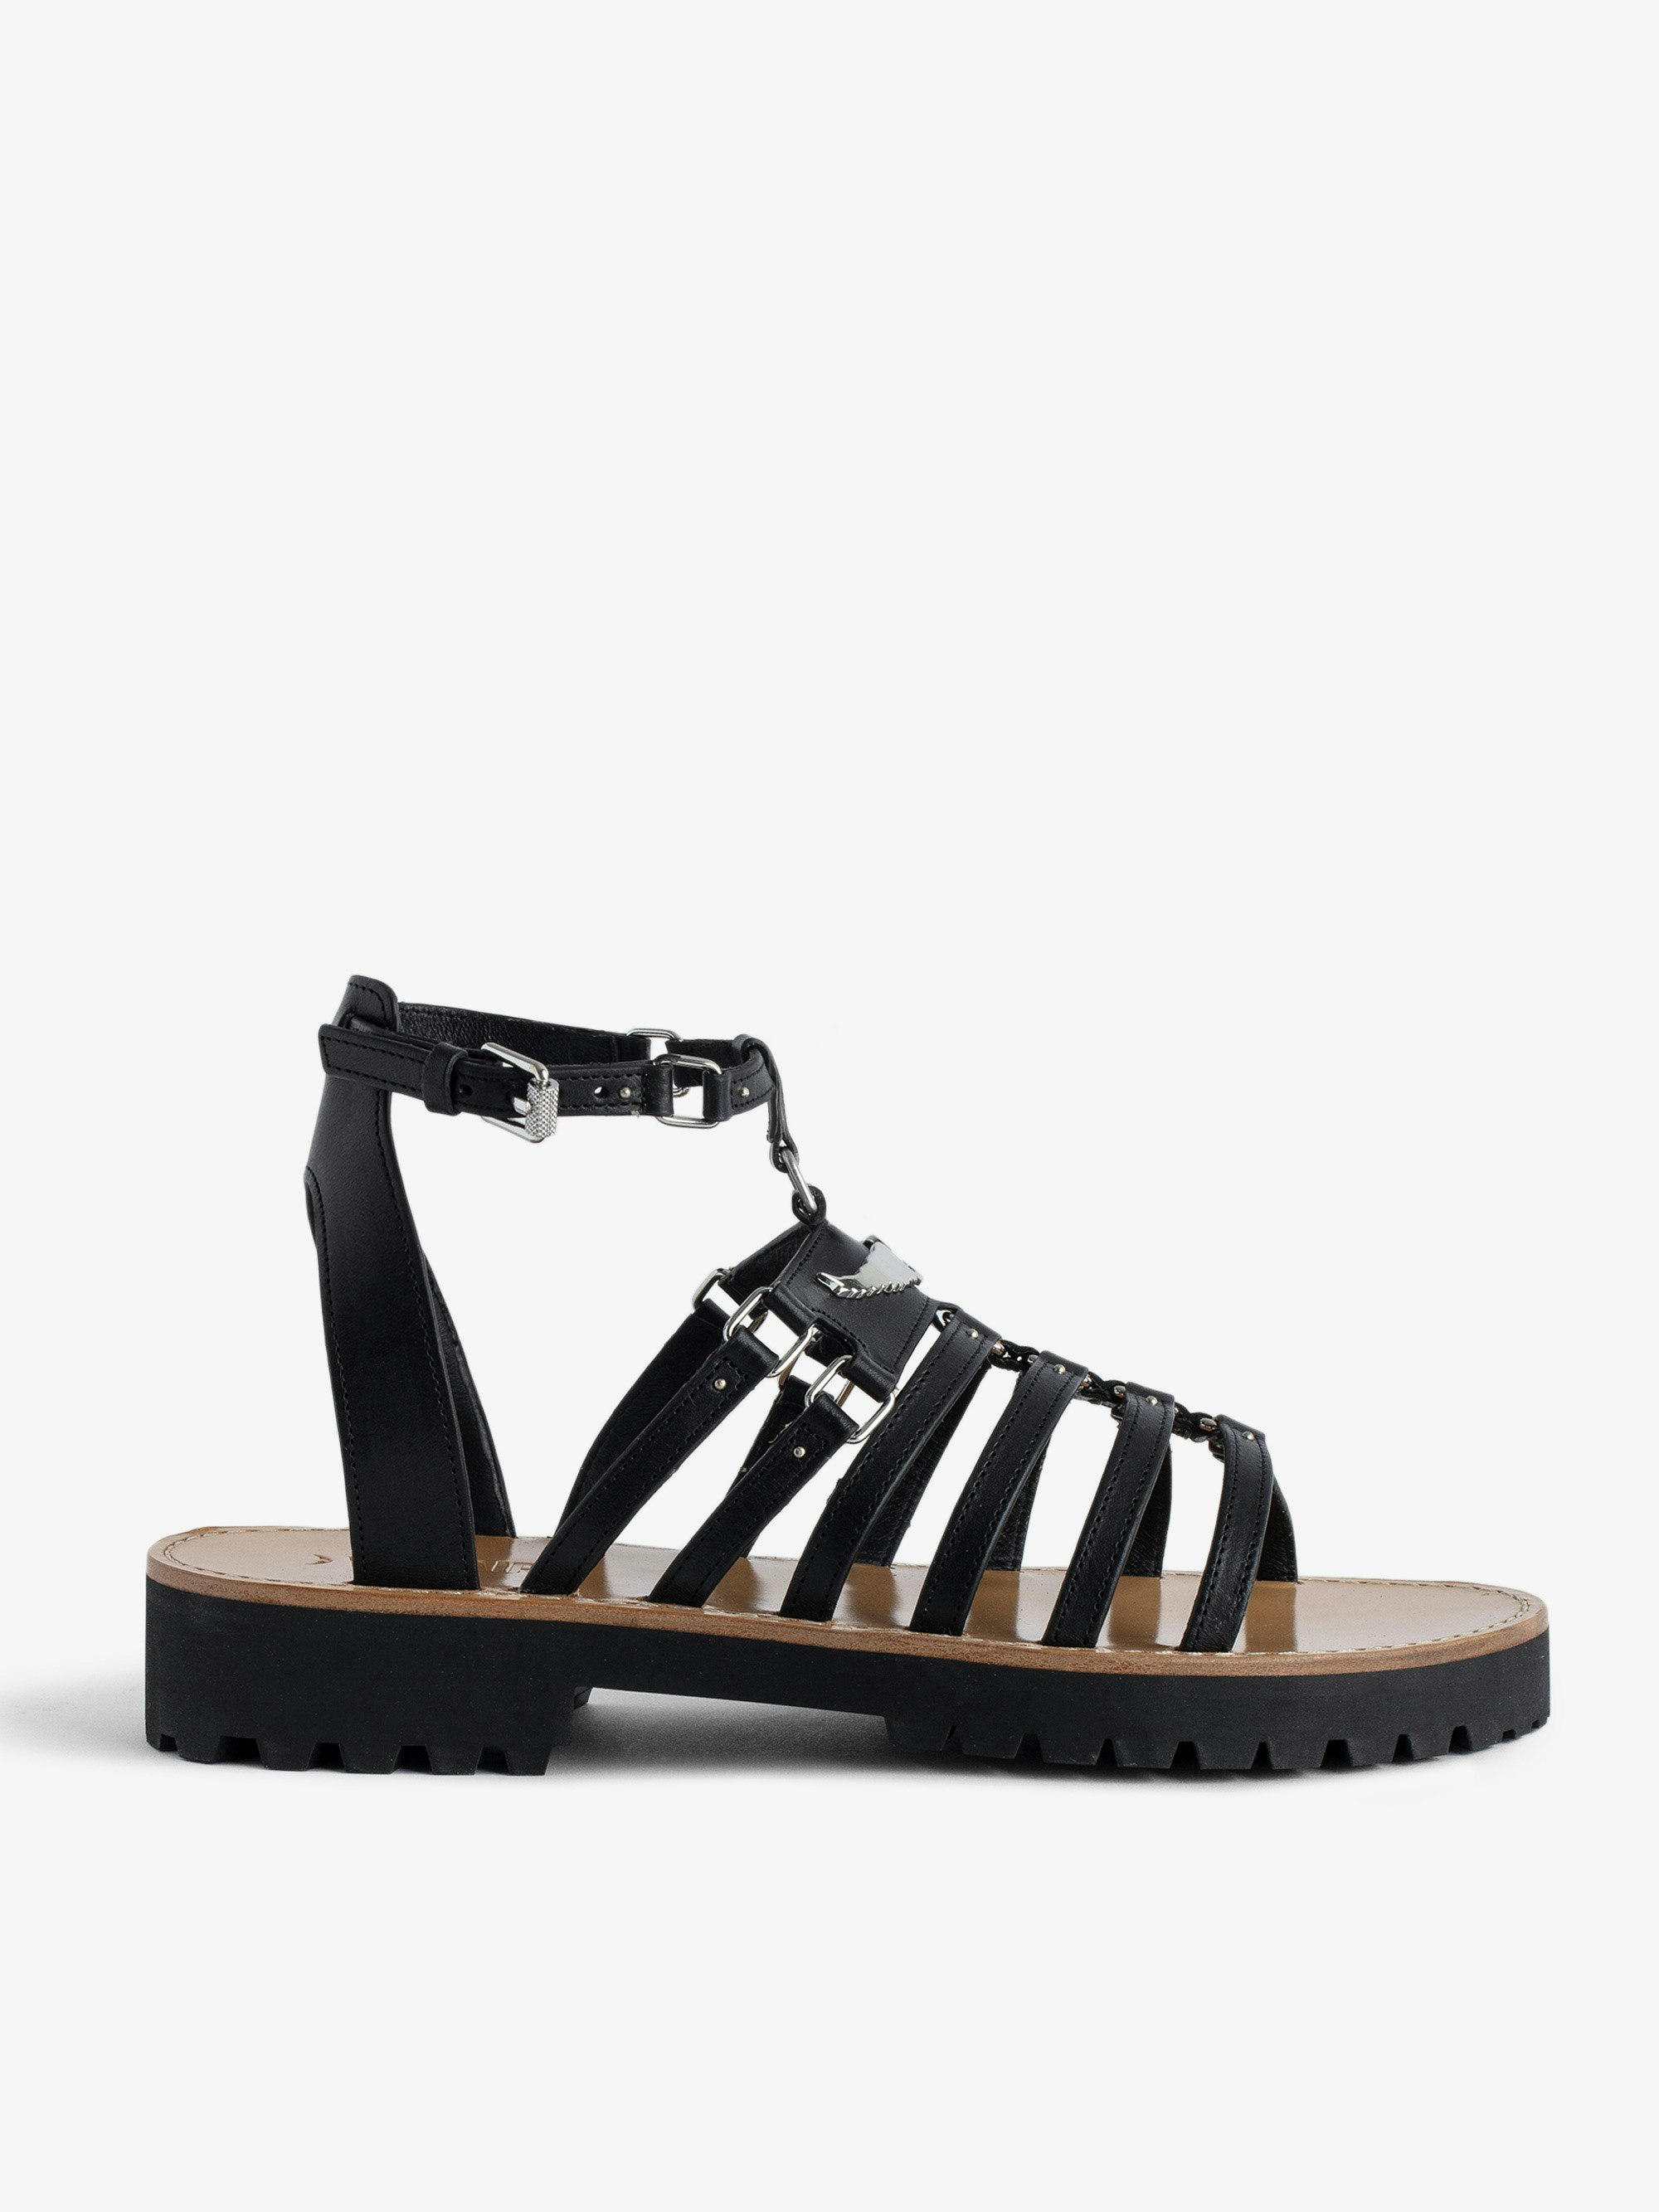 Joe Sandals - Black vegetable-tanned leather sandals with straps, adjustable buckle and wings charm.